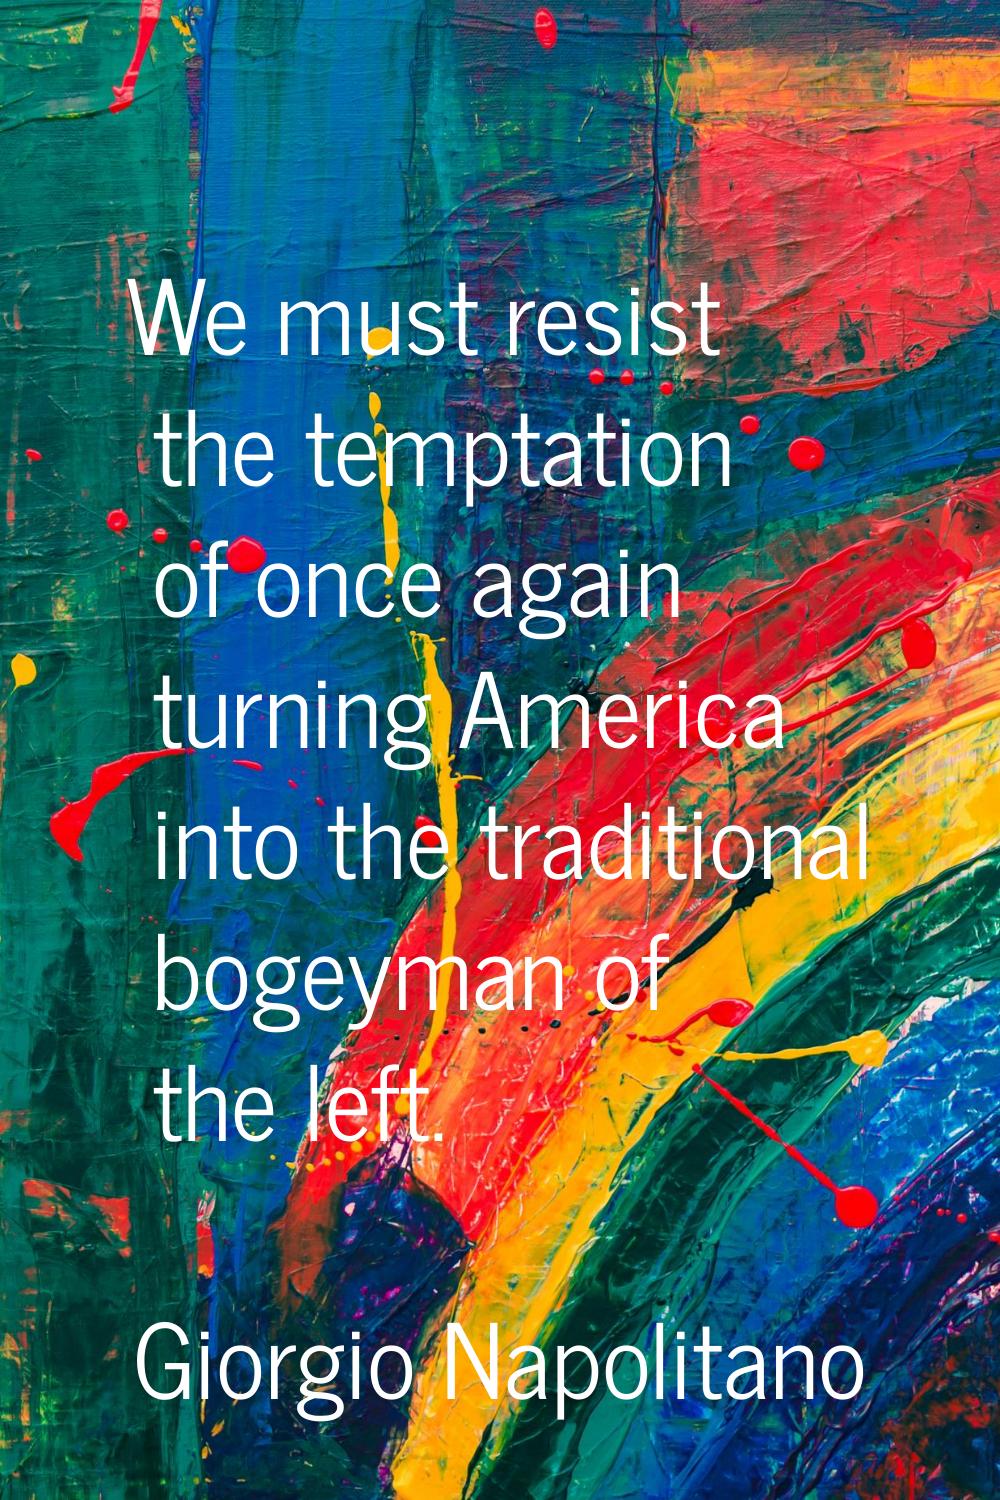 We must resist the temptation of once again turning America into the traditional bogeyman of the le